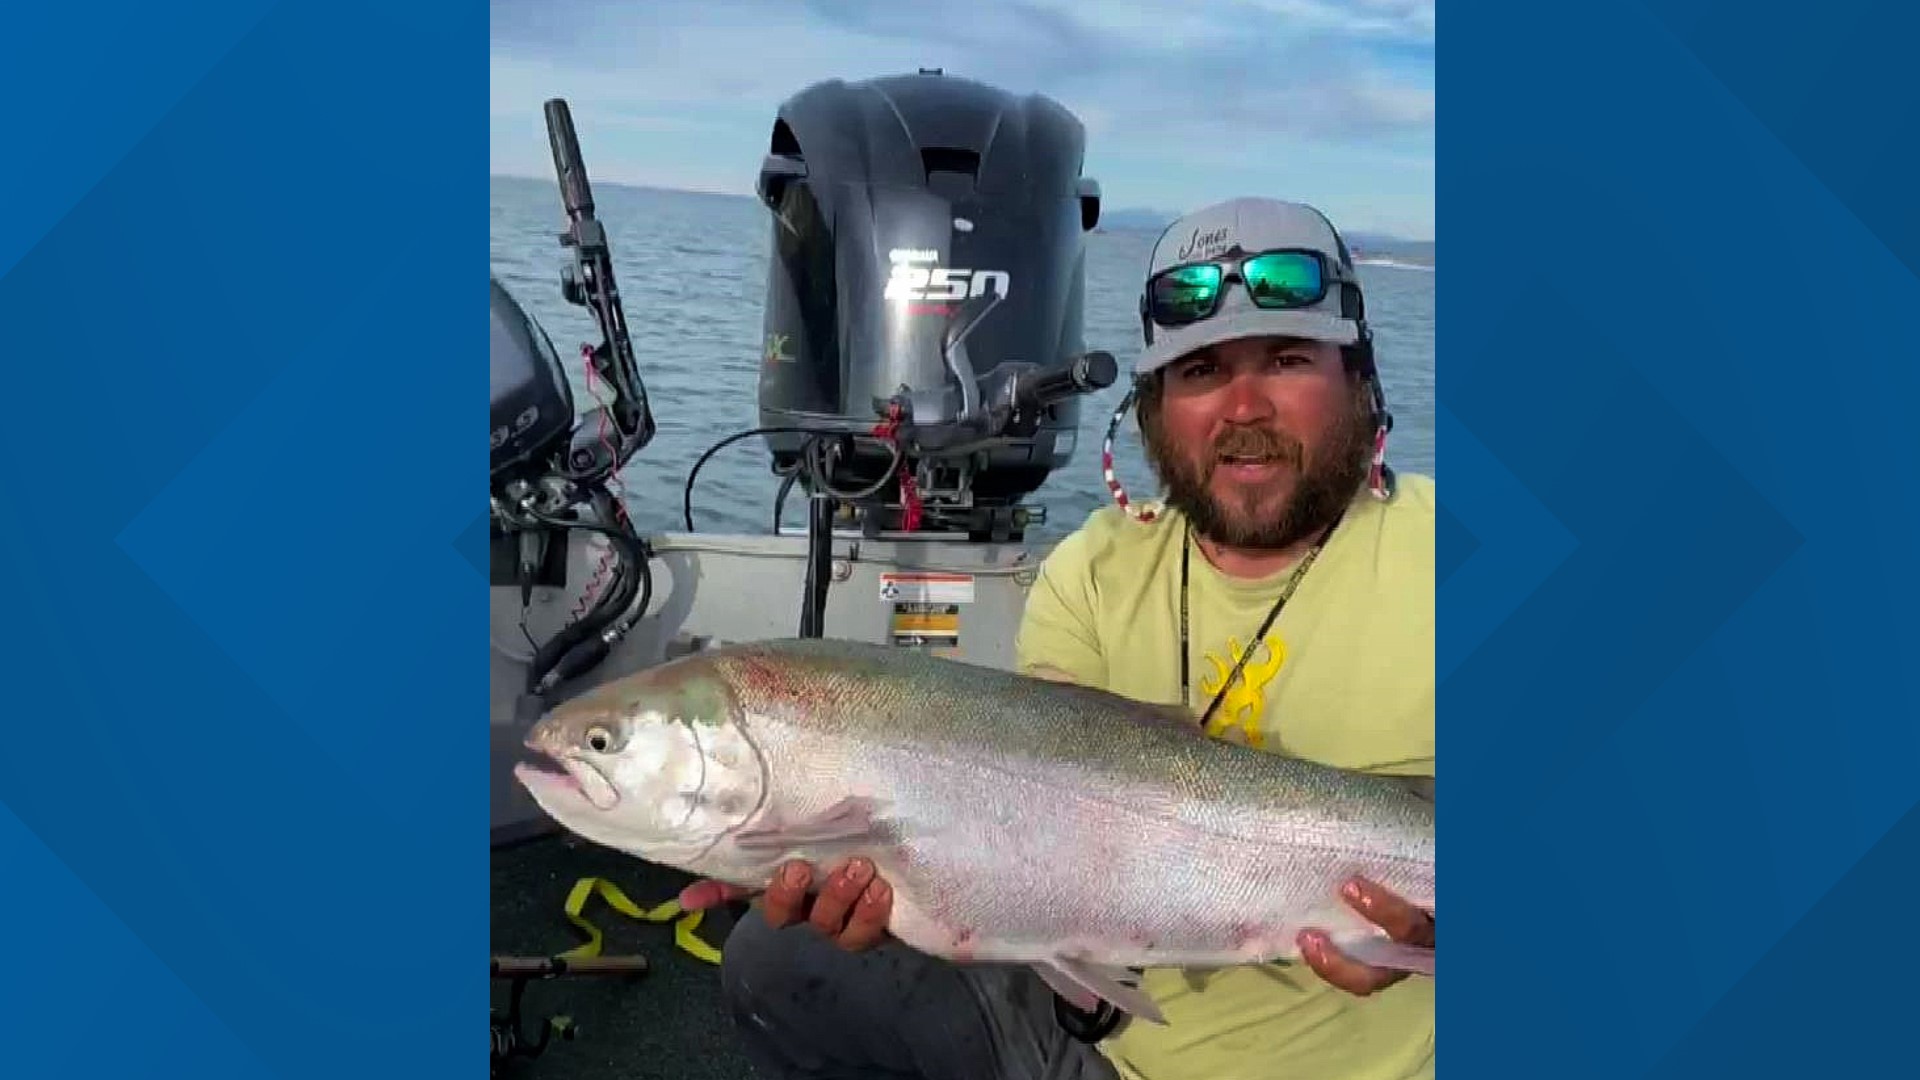 Wyoming man lands state-record rainbow trout in Idaho reservoir | ktvb.com